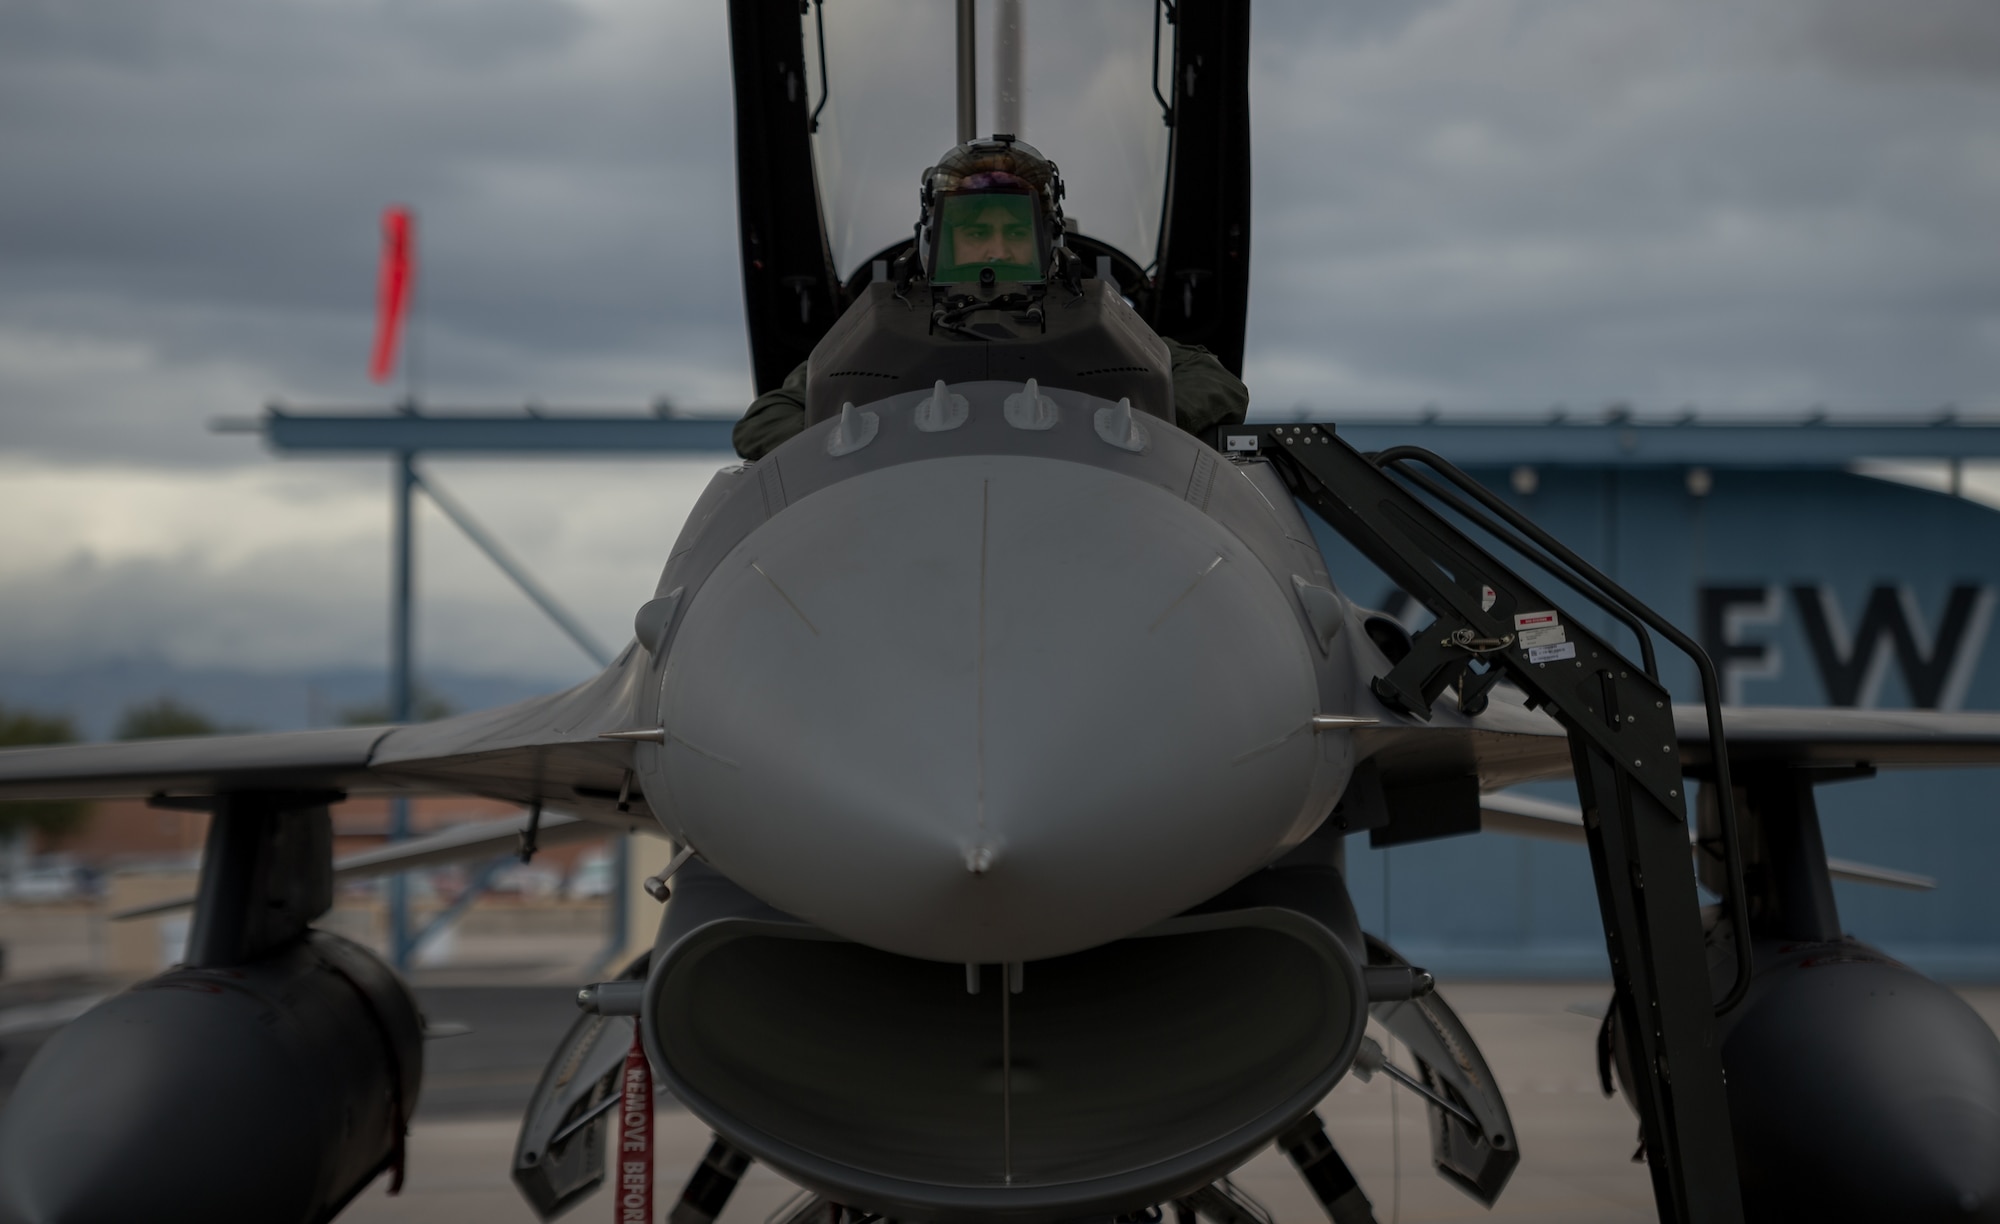 Iraqi air force captain Hama conducts a preflight inspection while inside a new IAF F-16 Fighting Falcon Dec. 17, 2014 at the Tucson International Airport, Ariz. Hama was part of the first class of Iraqi students training with the 162nd Wing to further enhance interoperability between the two partner nations. (U.S. Air Force photo/Senior Airman Jordan Castelan)